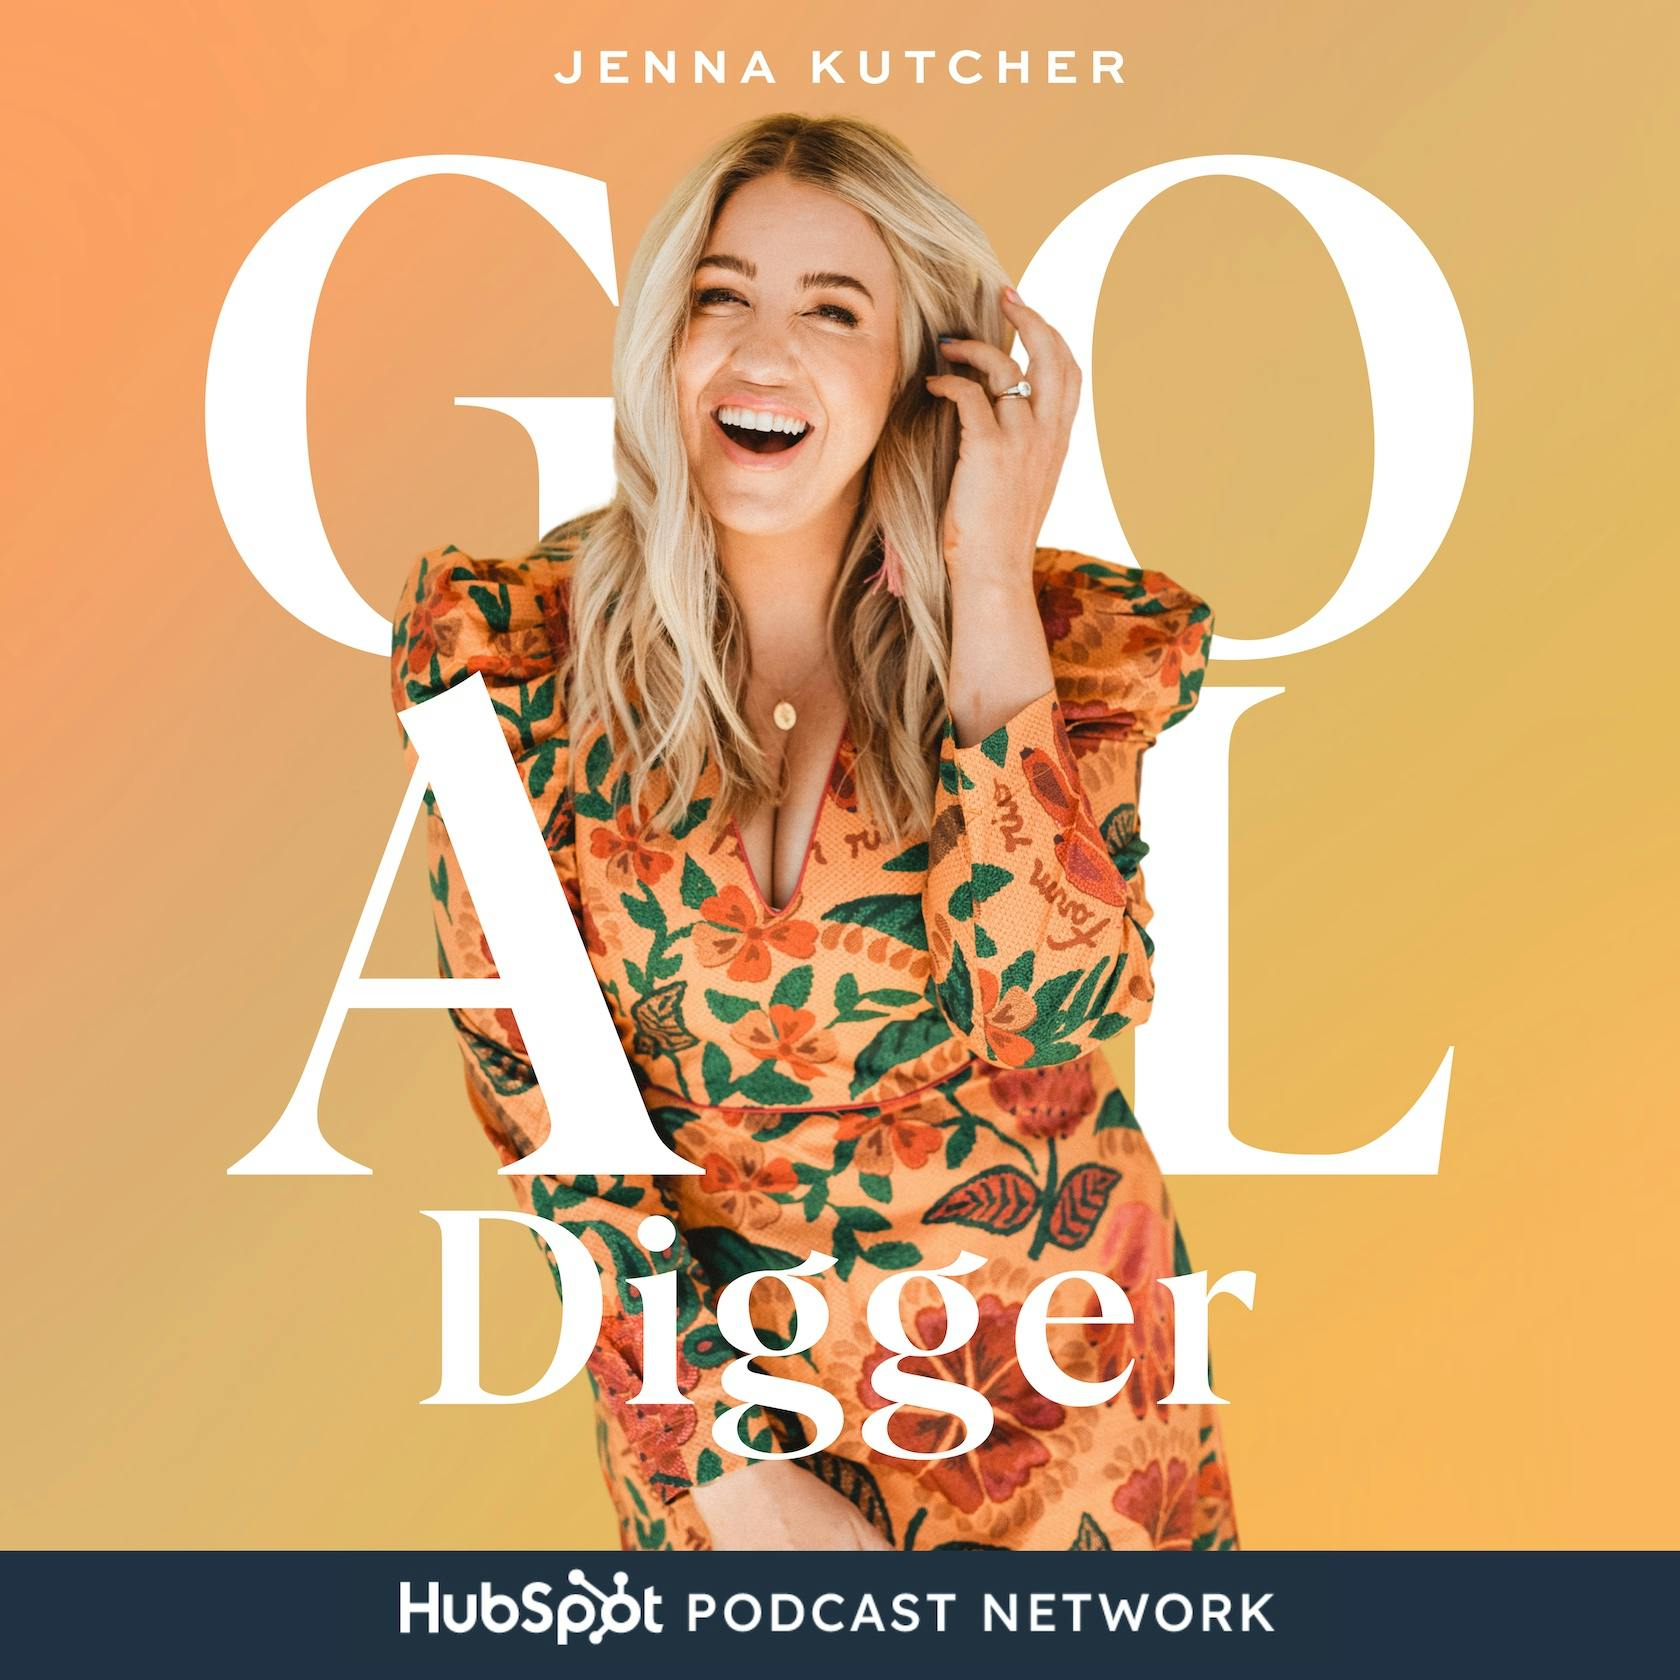 582: How to Attract, Hire and Manage Your Business Dream Team